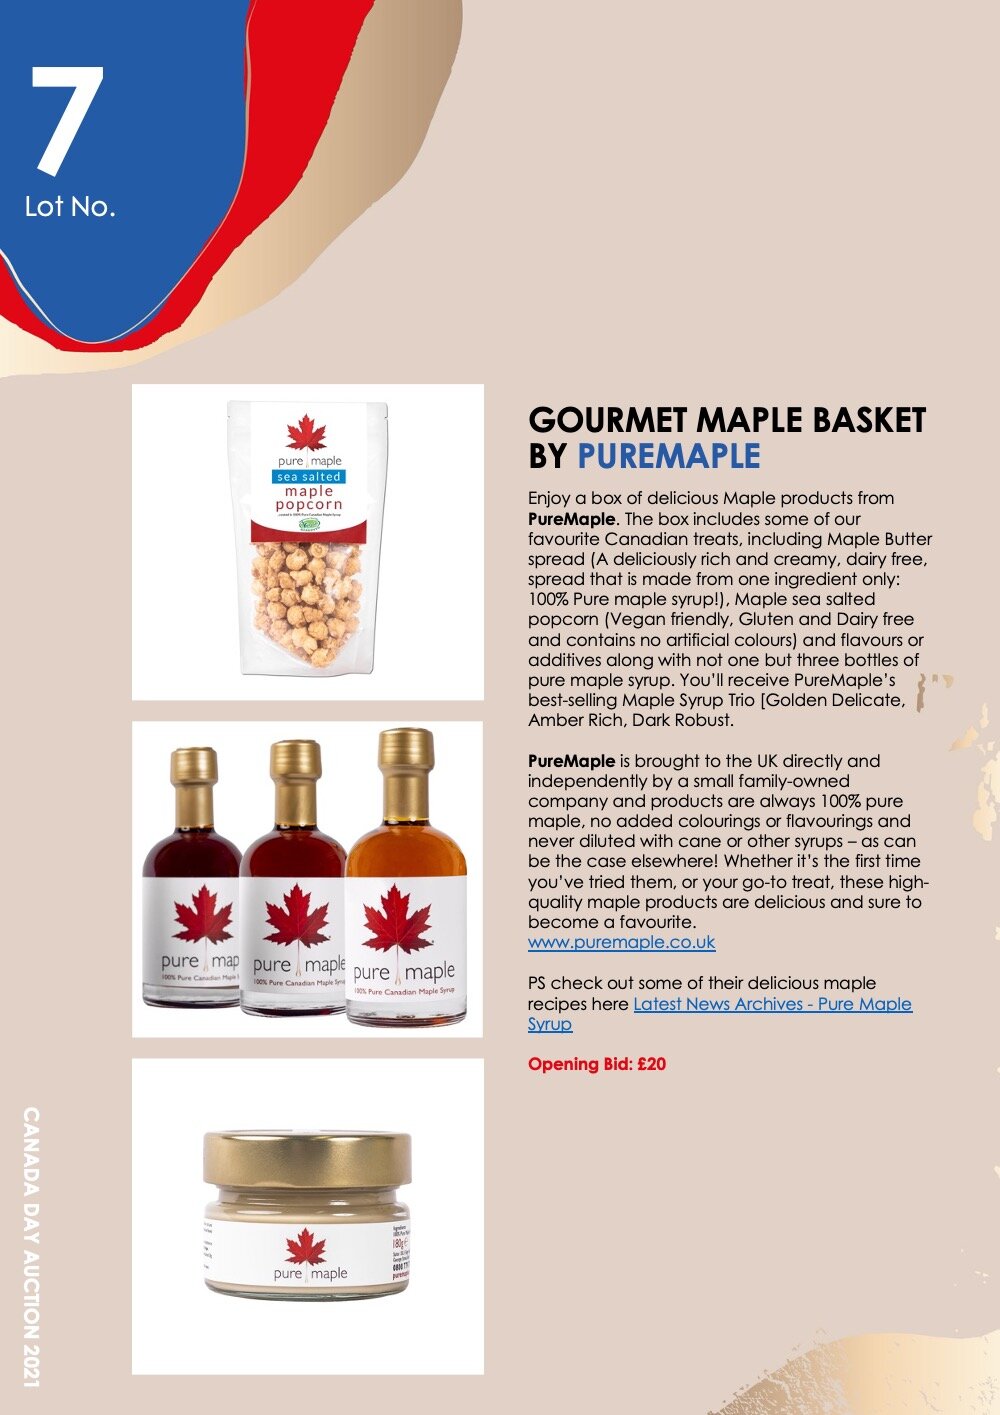   Lot 7: GOURMET MAPLE BASKET BY PUREMAPLE    Enjoy a box of delicious Maple products from  PureMaple . The box includes some of our favourite Canadian treats, including Maple Butter spread (A deliciously rich and creamy, dairy free, spread that is m